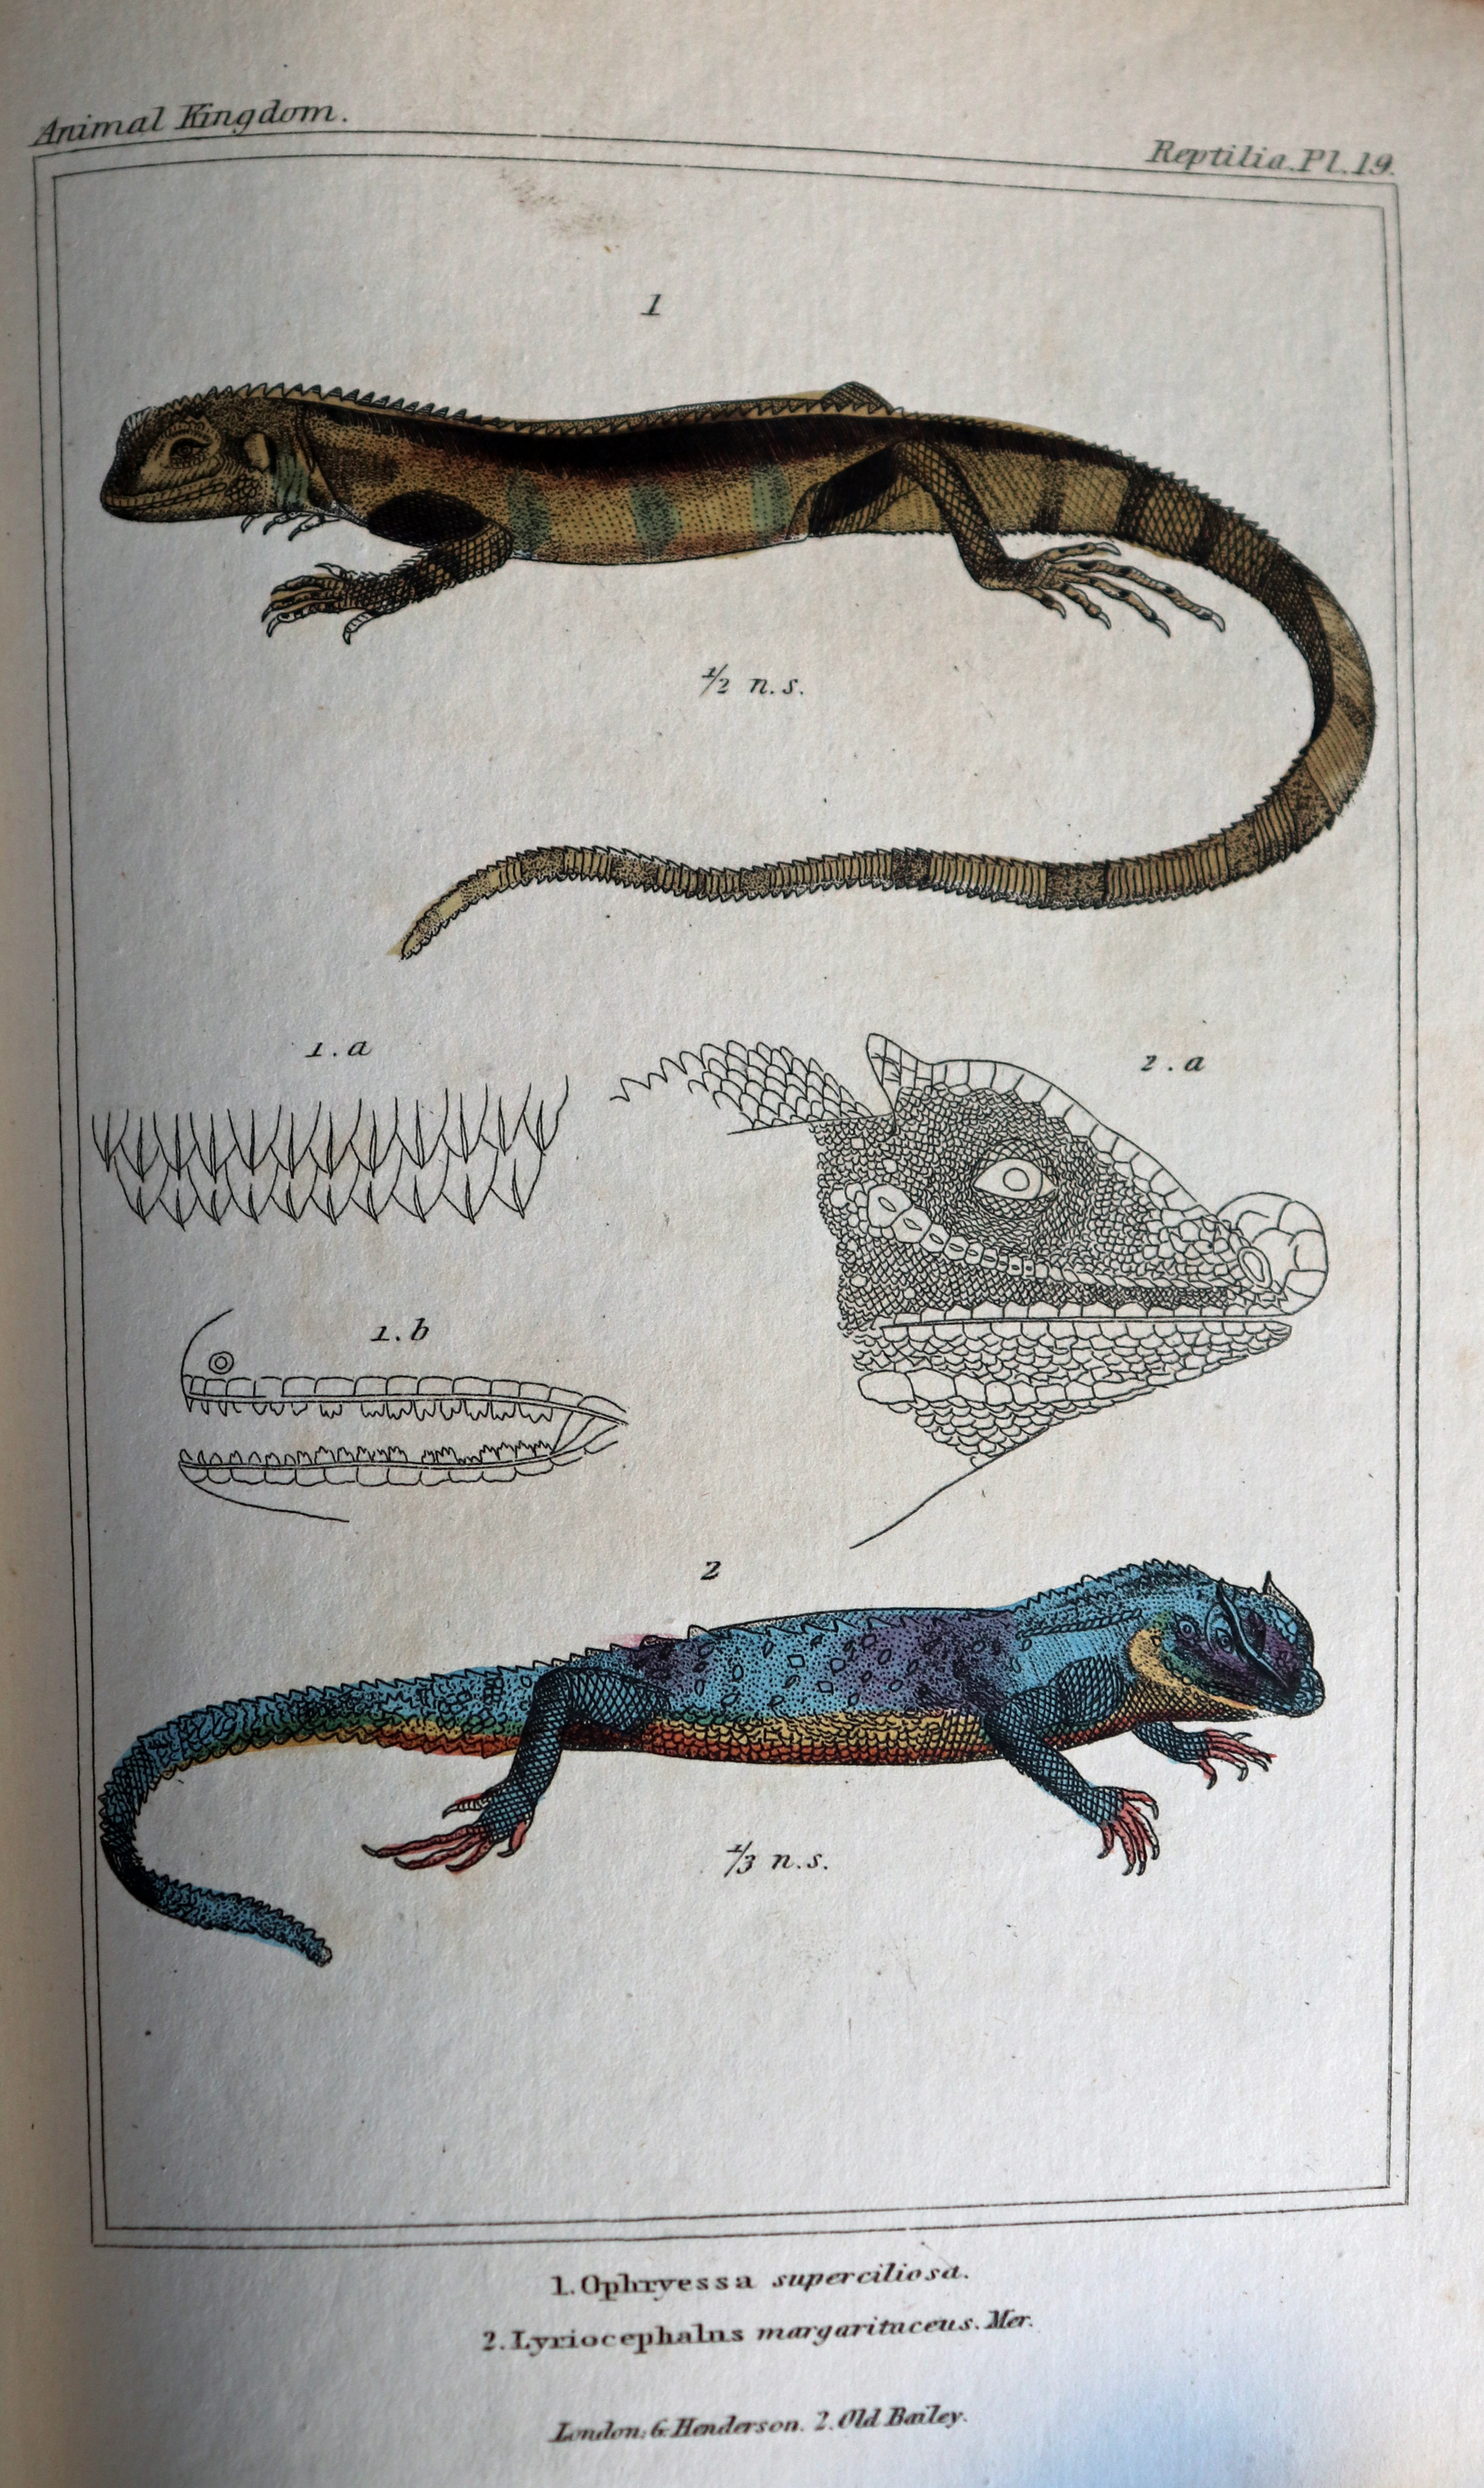 zoology library archive image - Cuvier Lizards